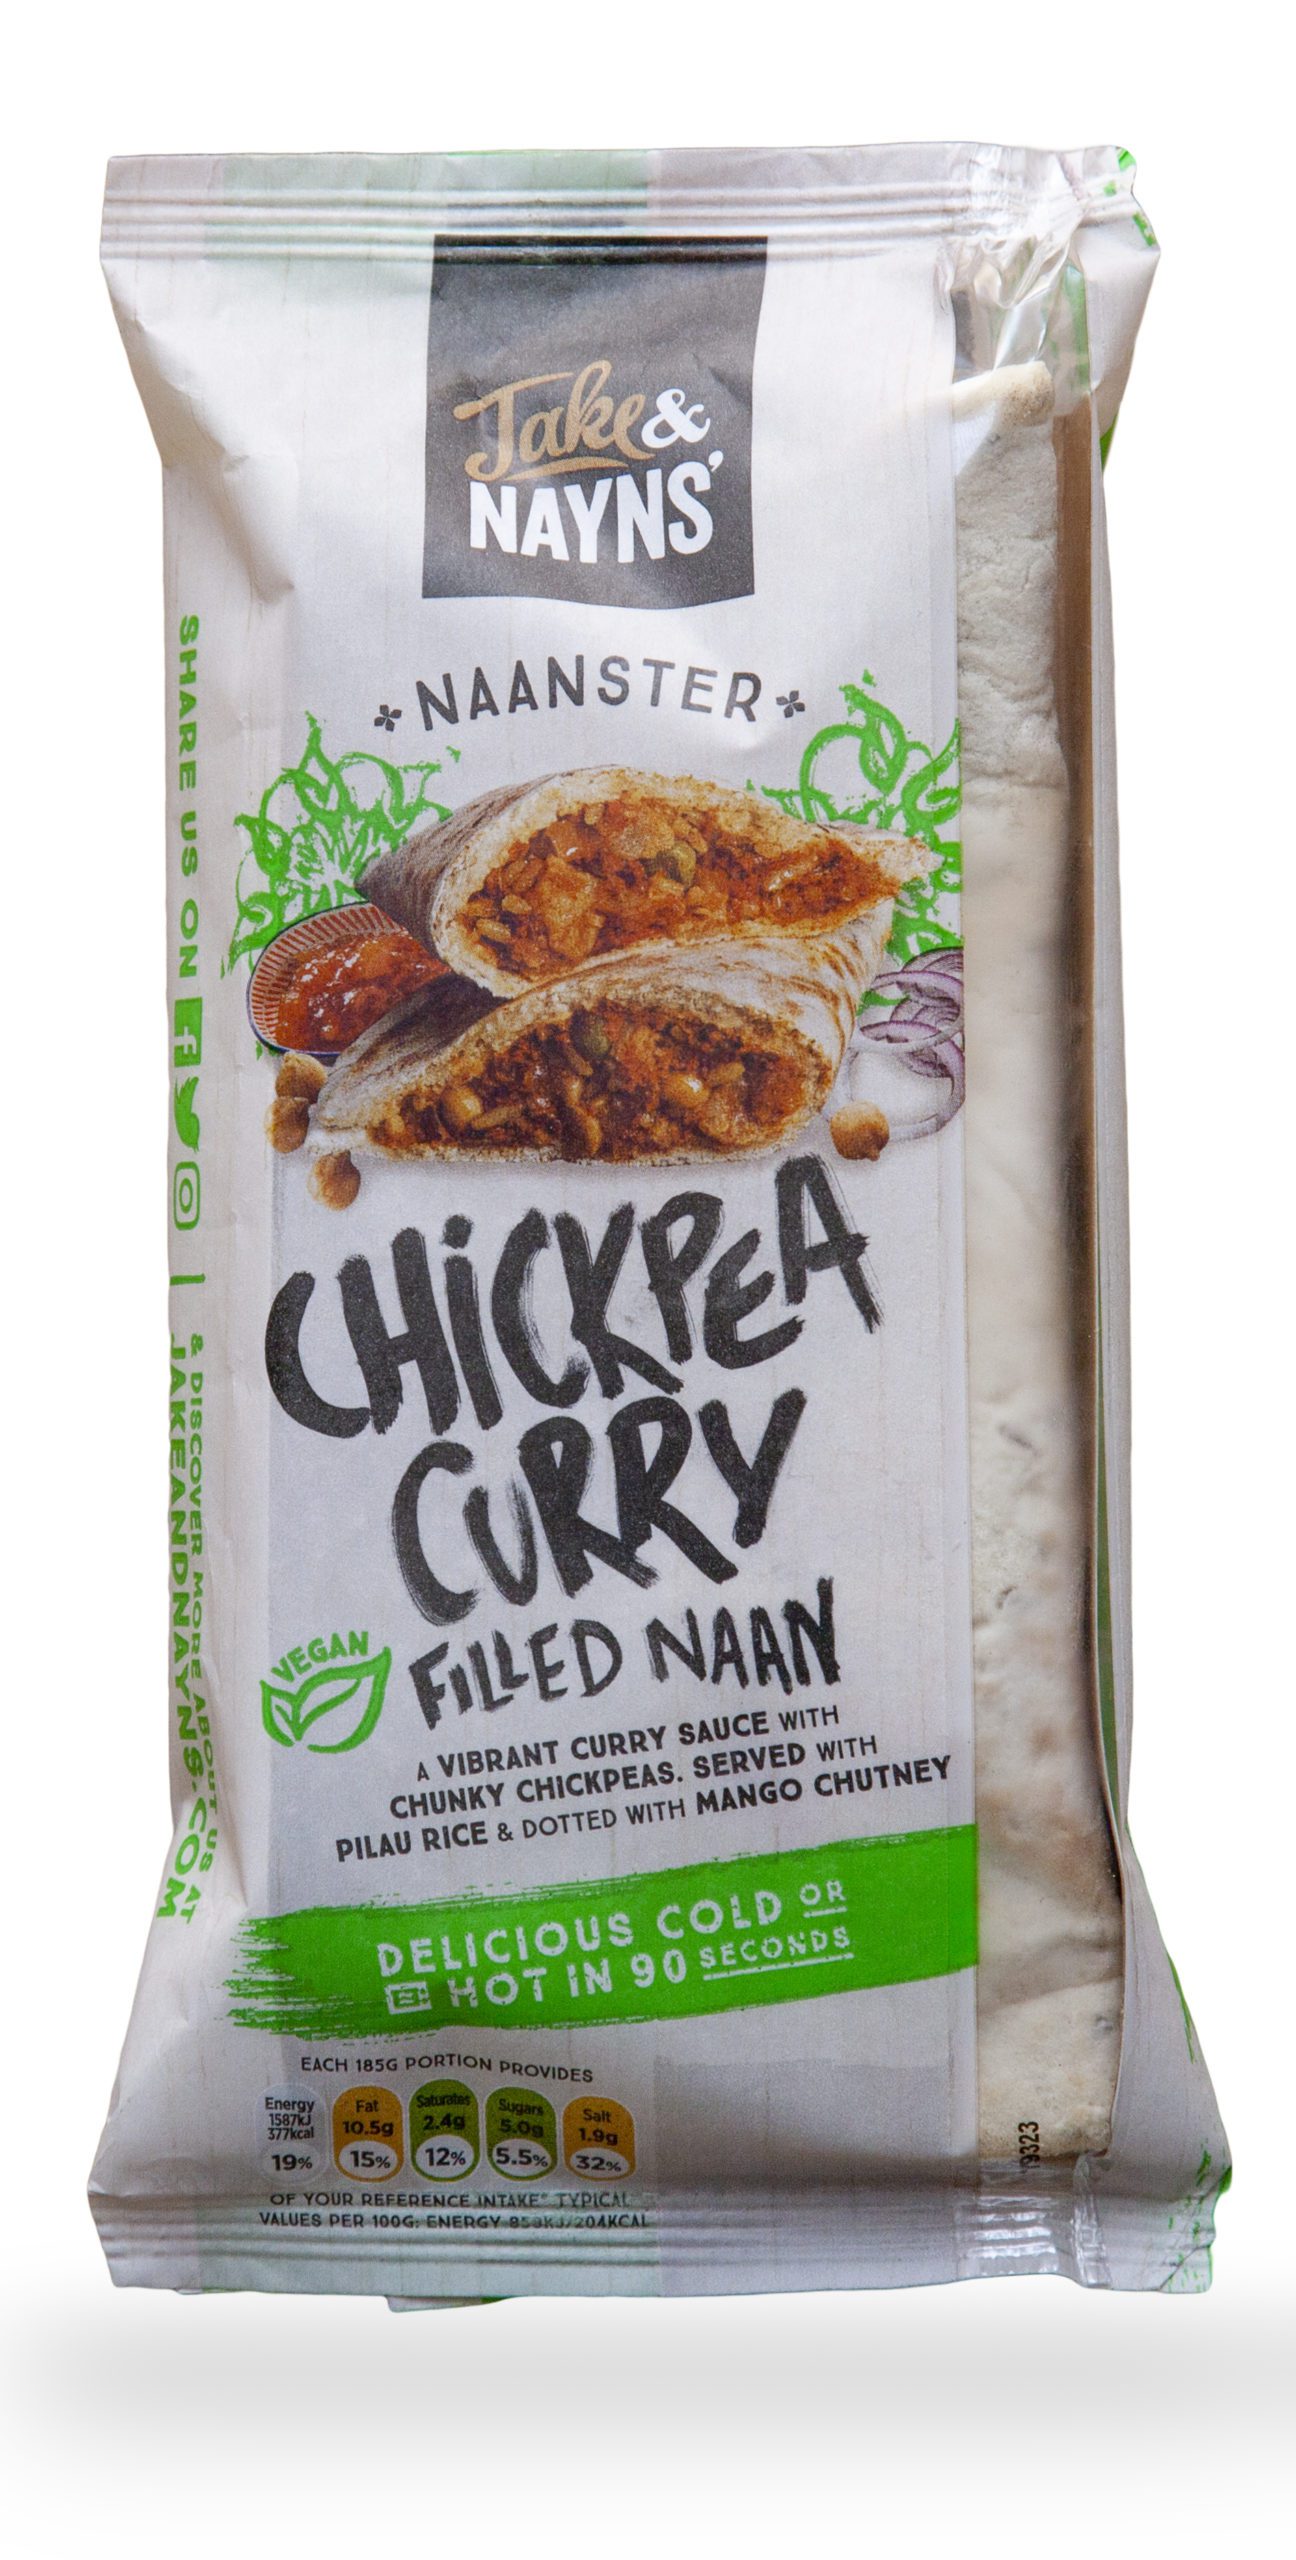 Naanster chickpea curry